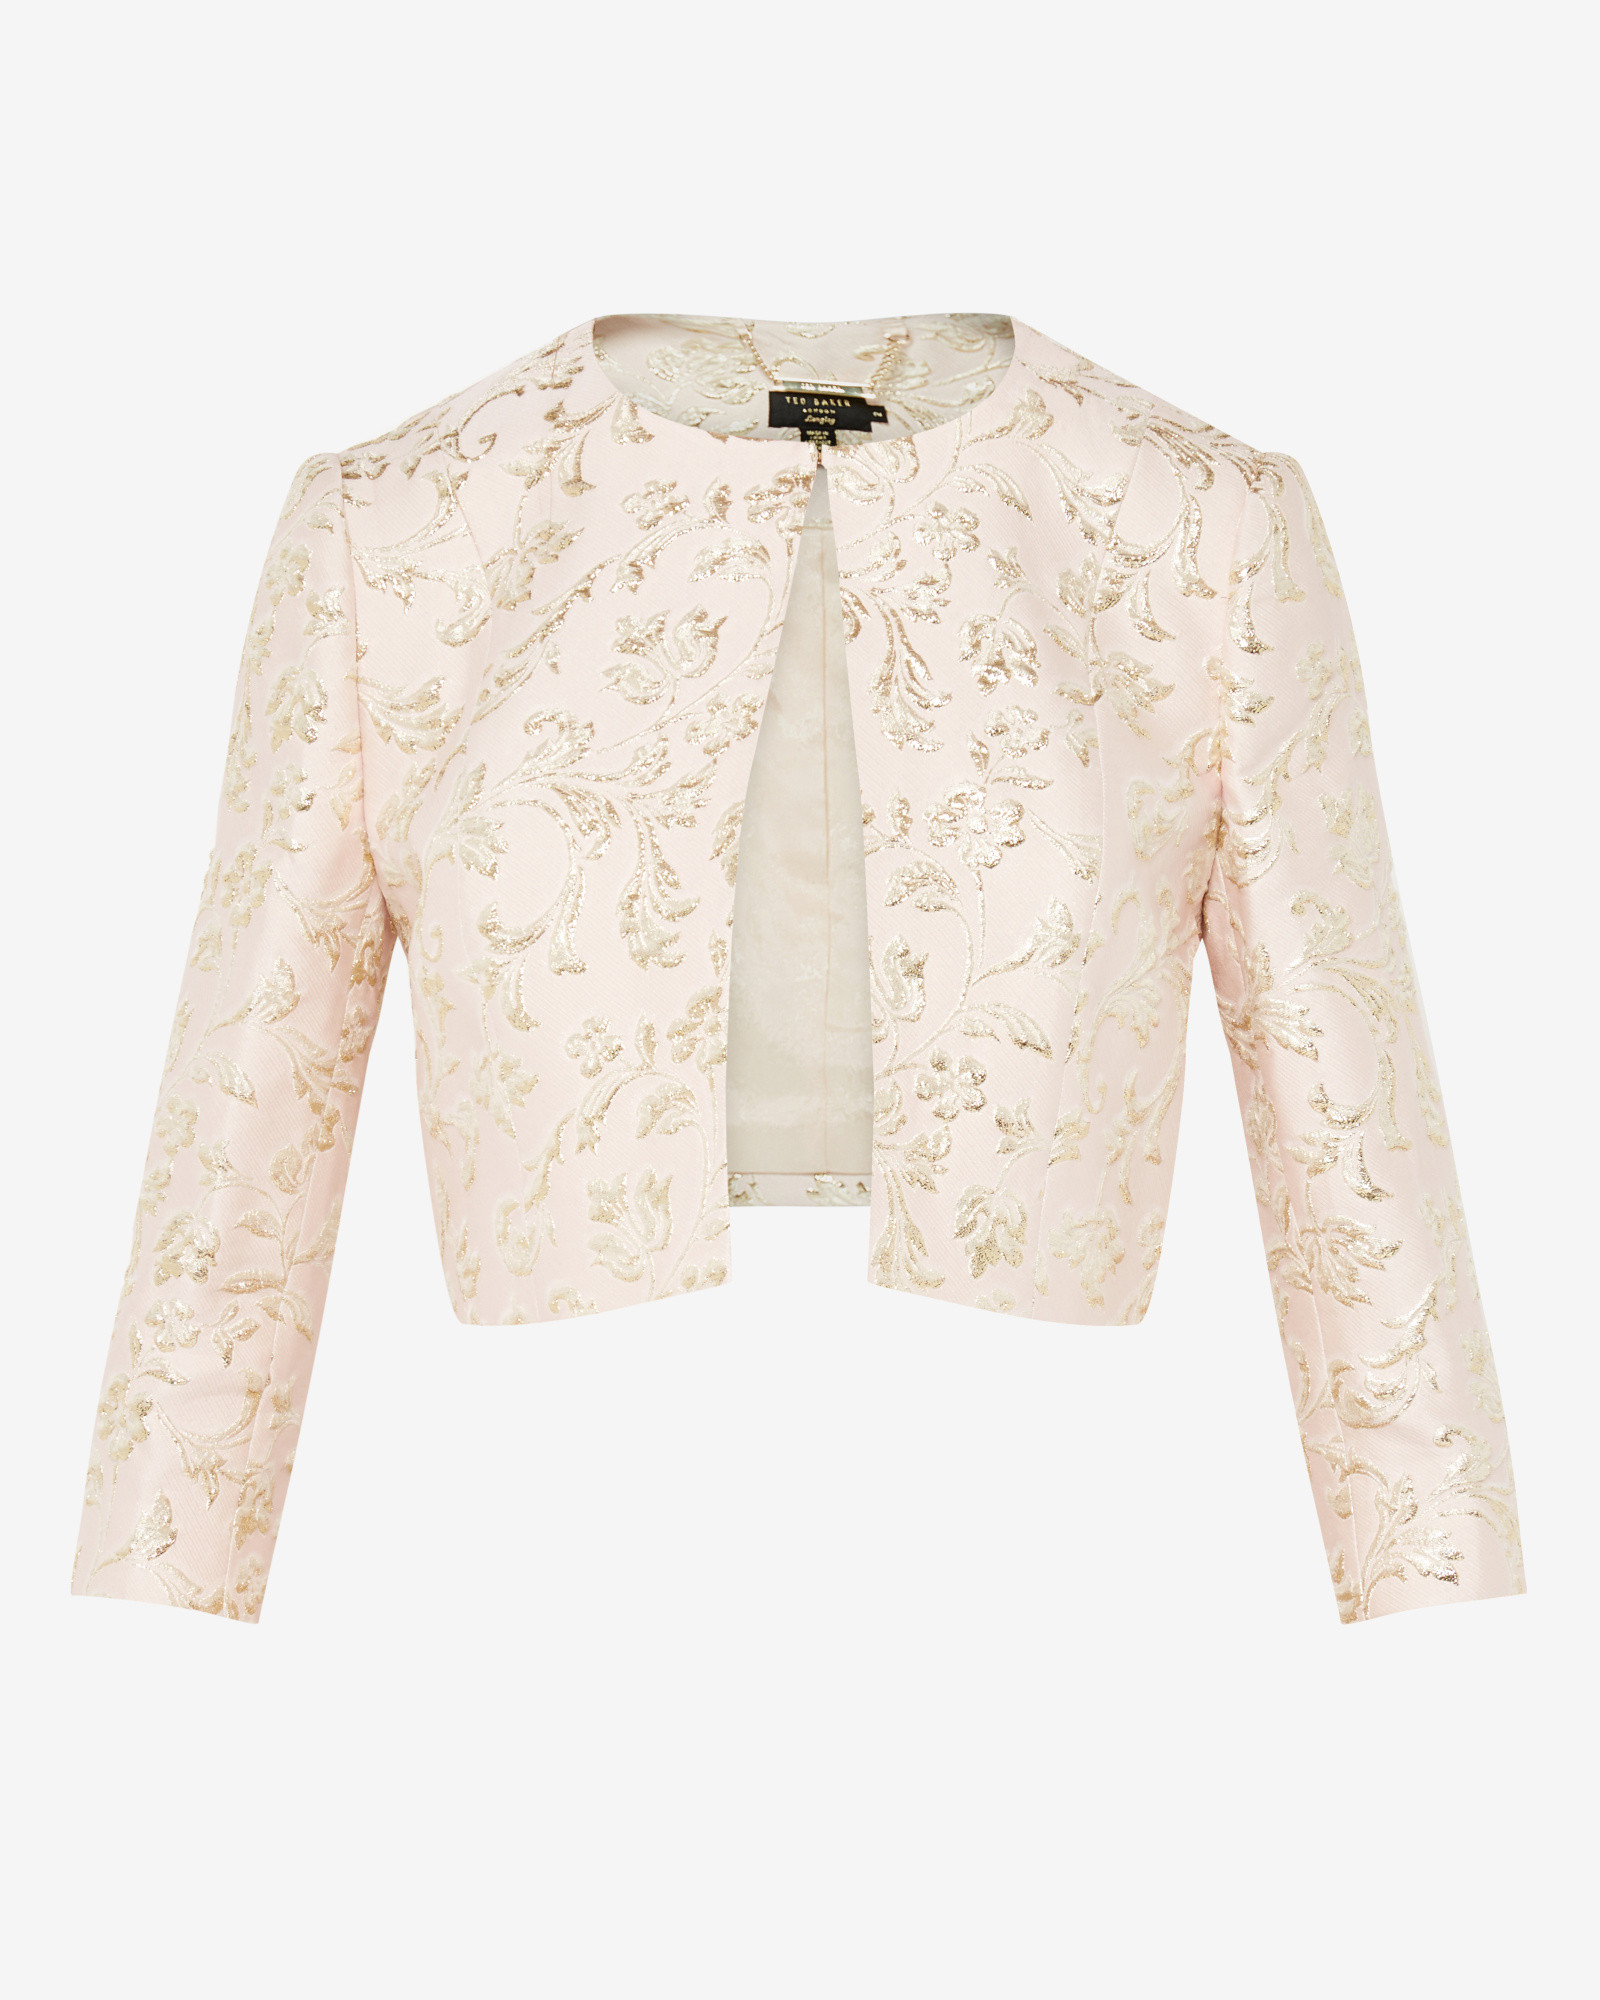 Ted Baker Floral Metallic Jacquard Jacket in Pink - Lyst